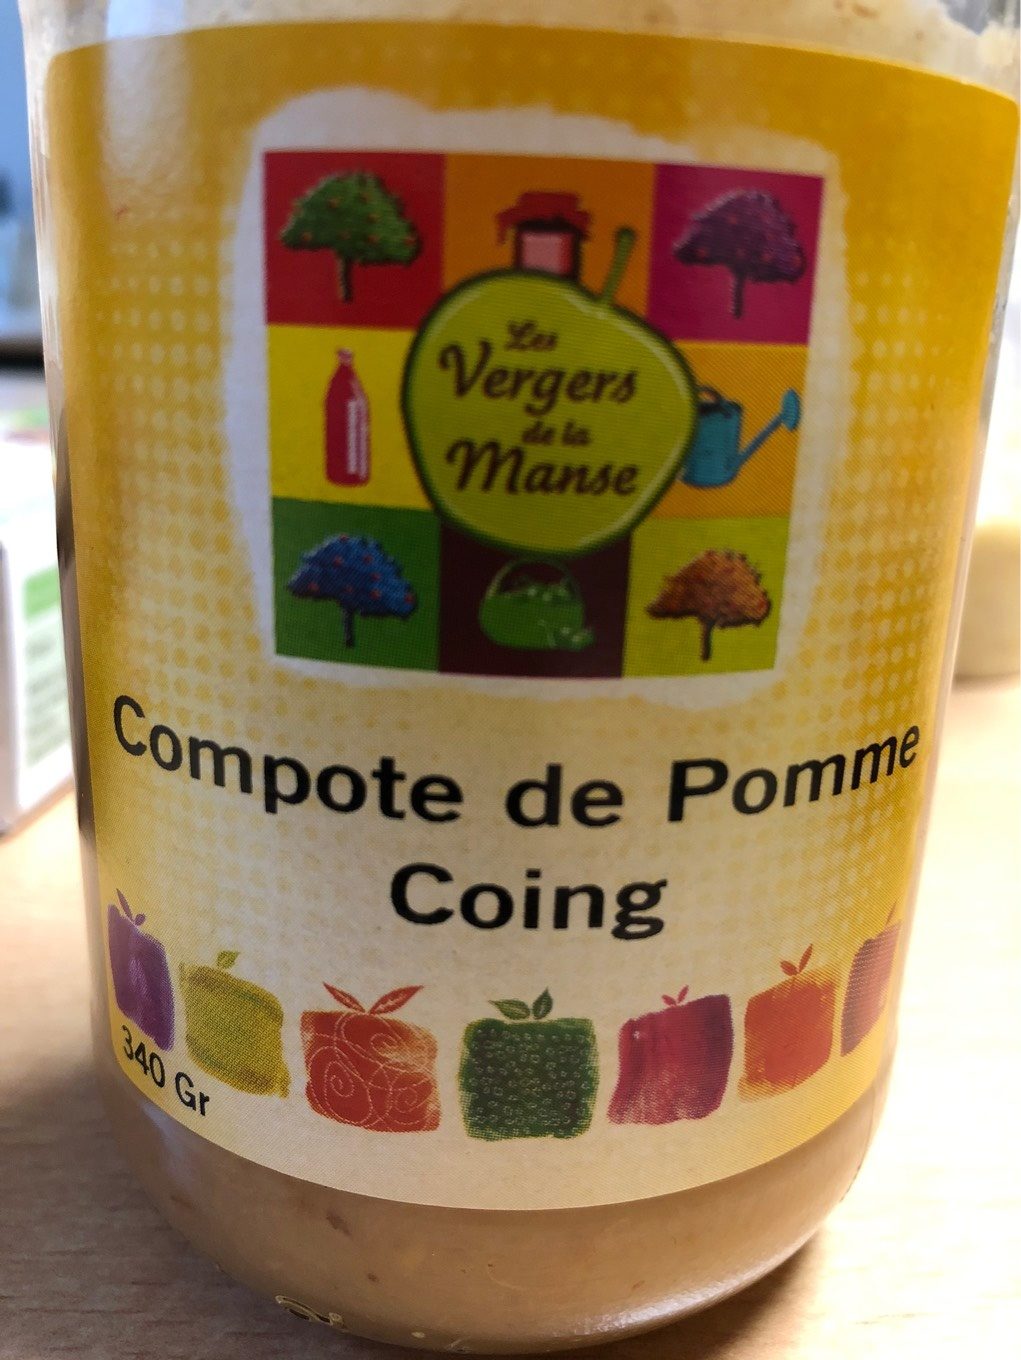 Compote de pomme coing - Product - fr